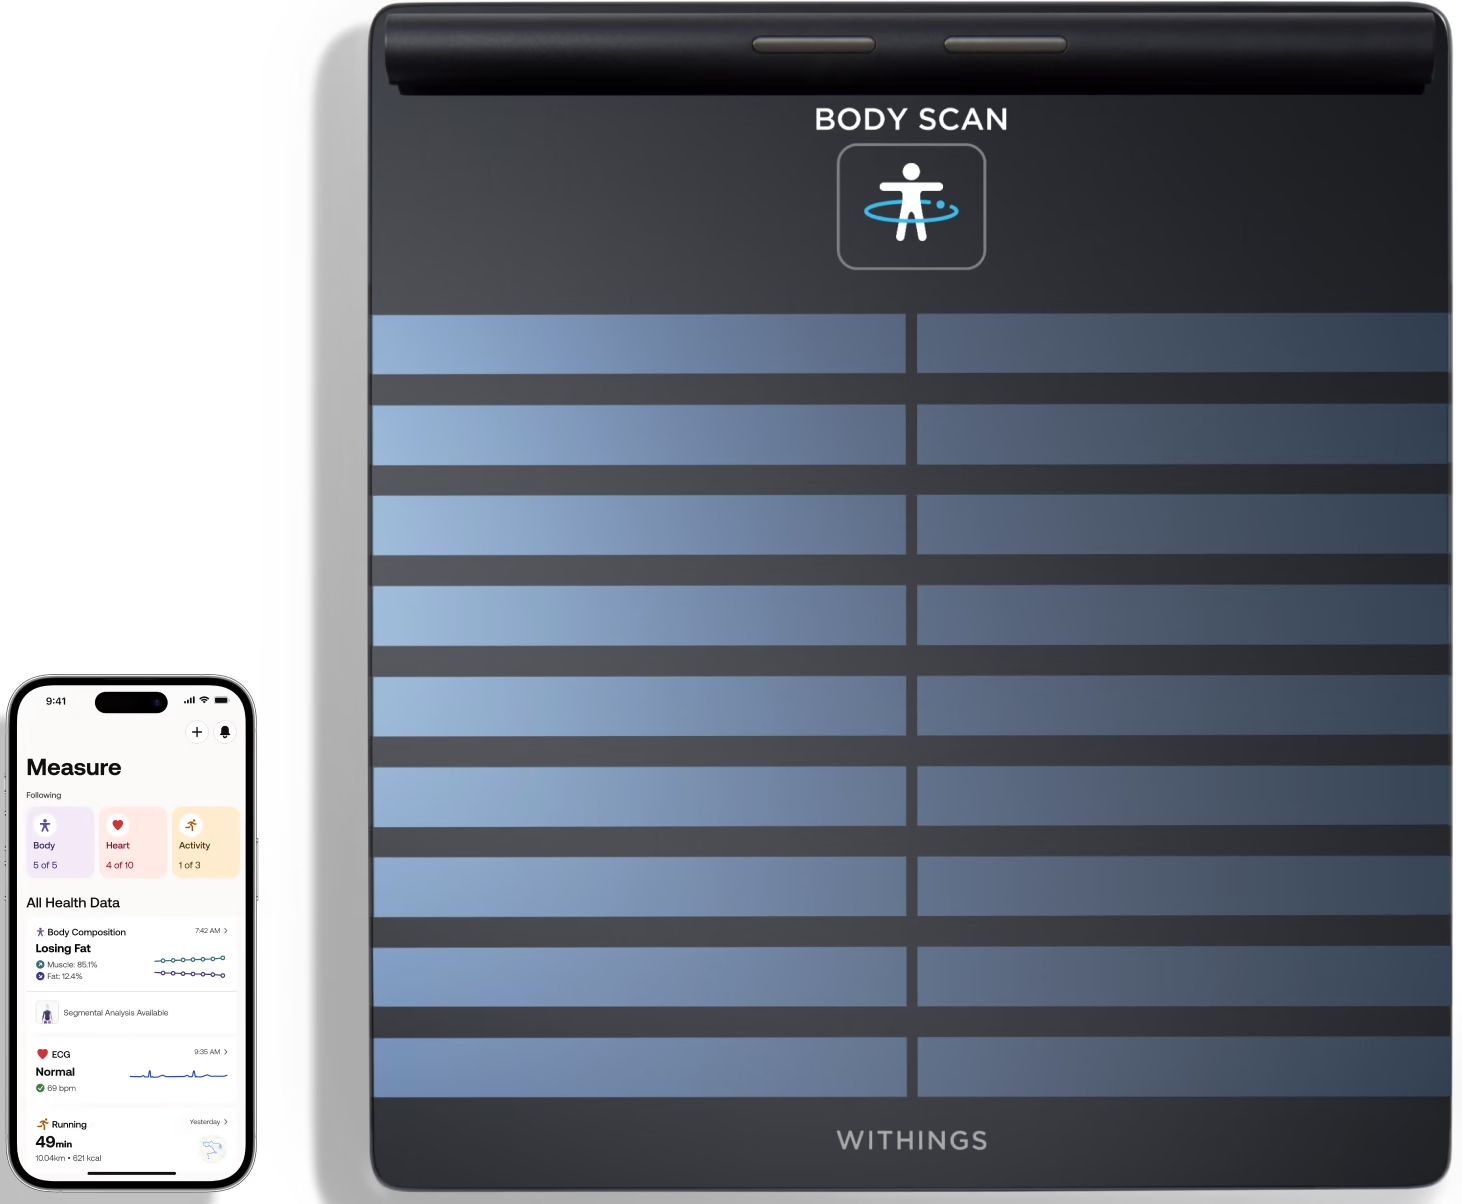 A body scan device next to a smart phone